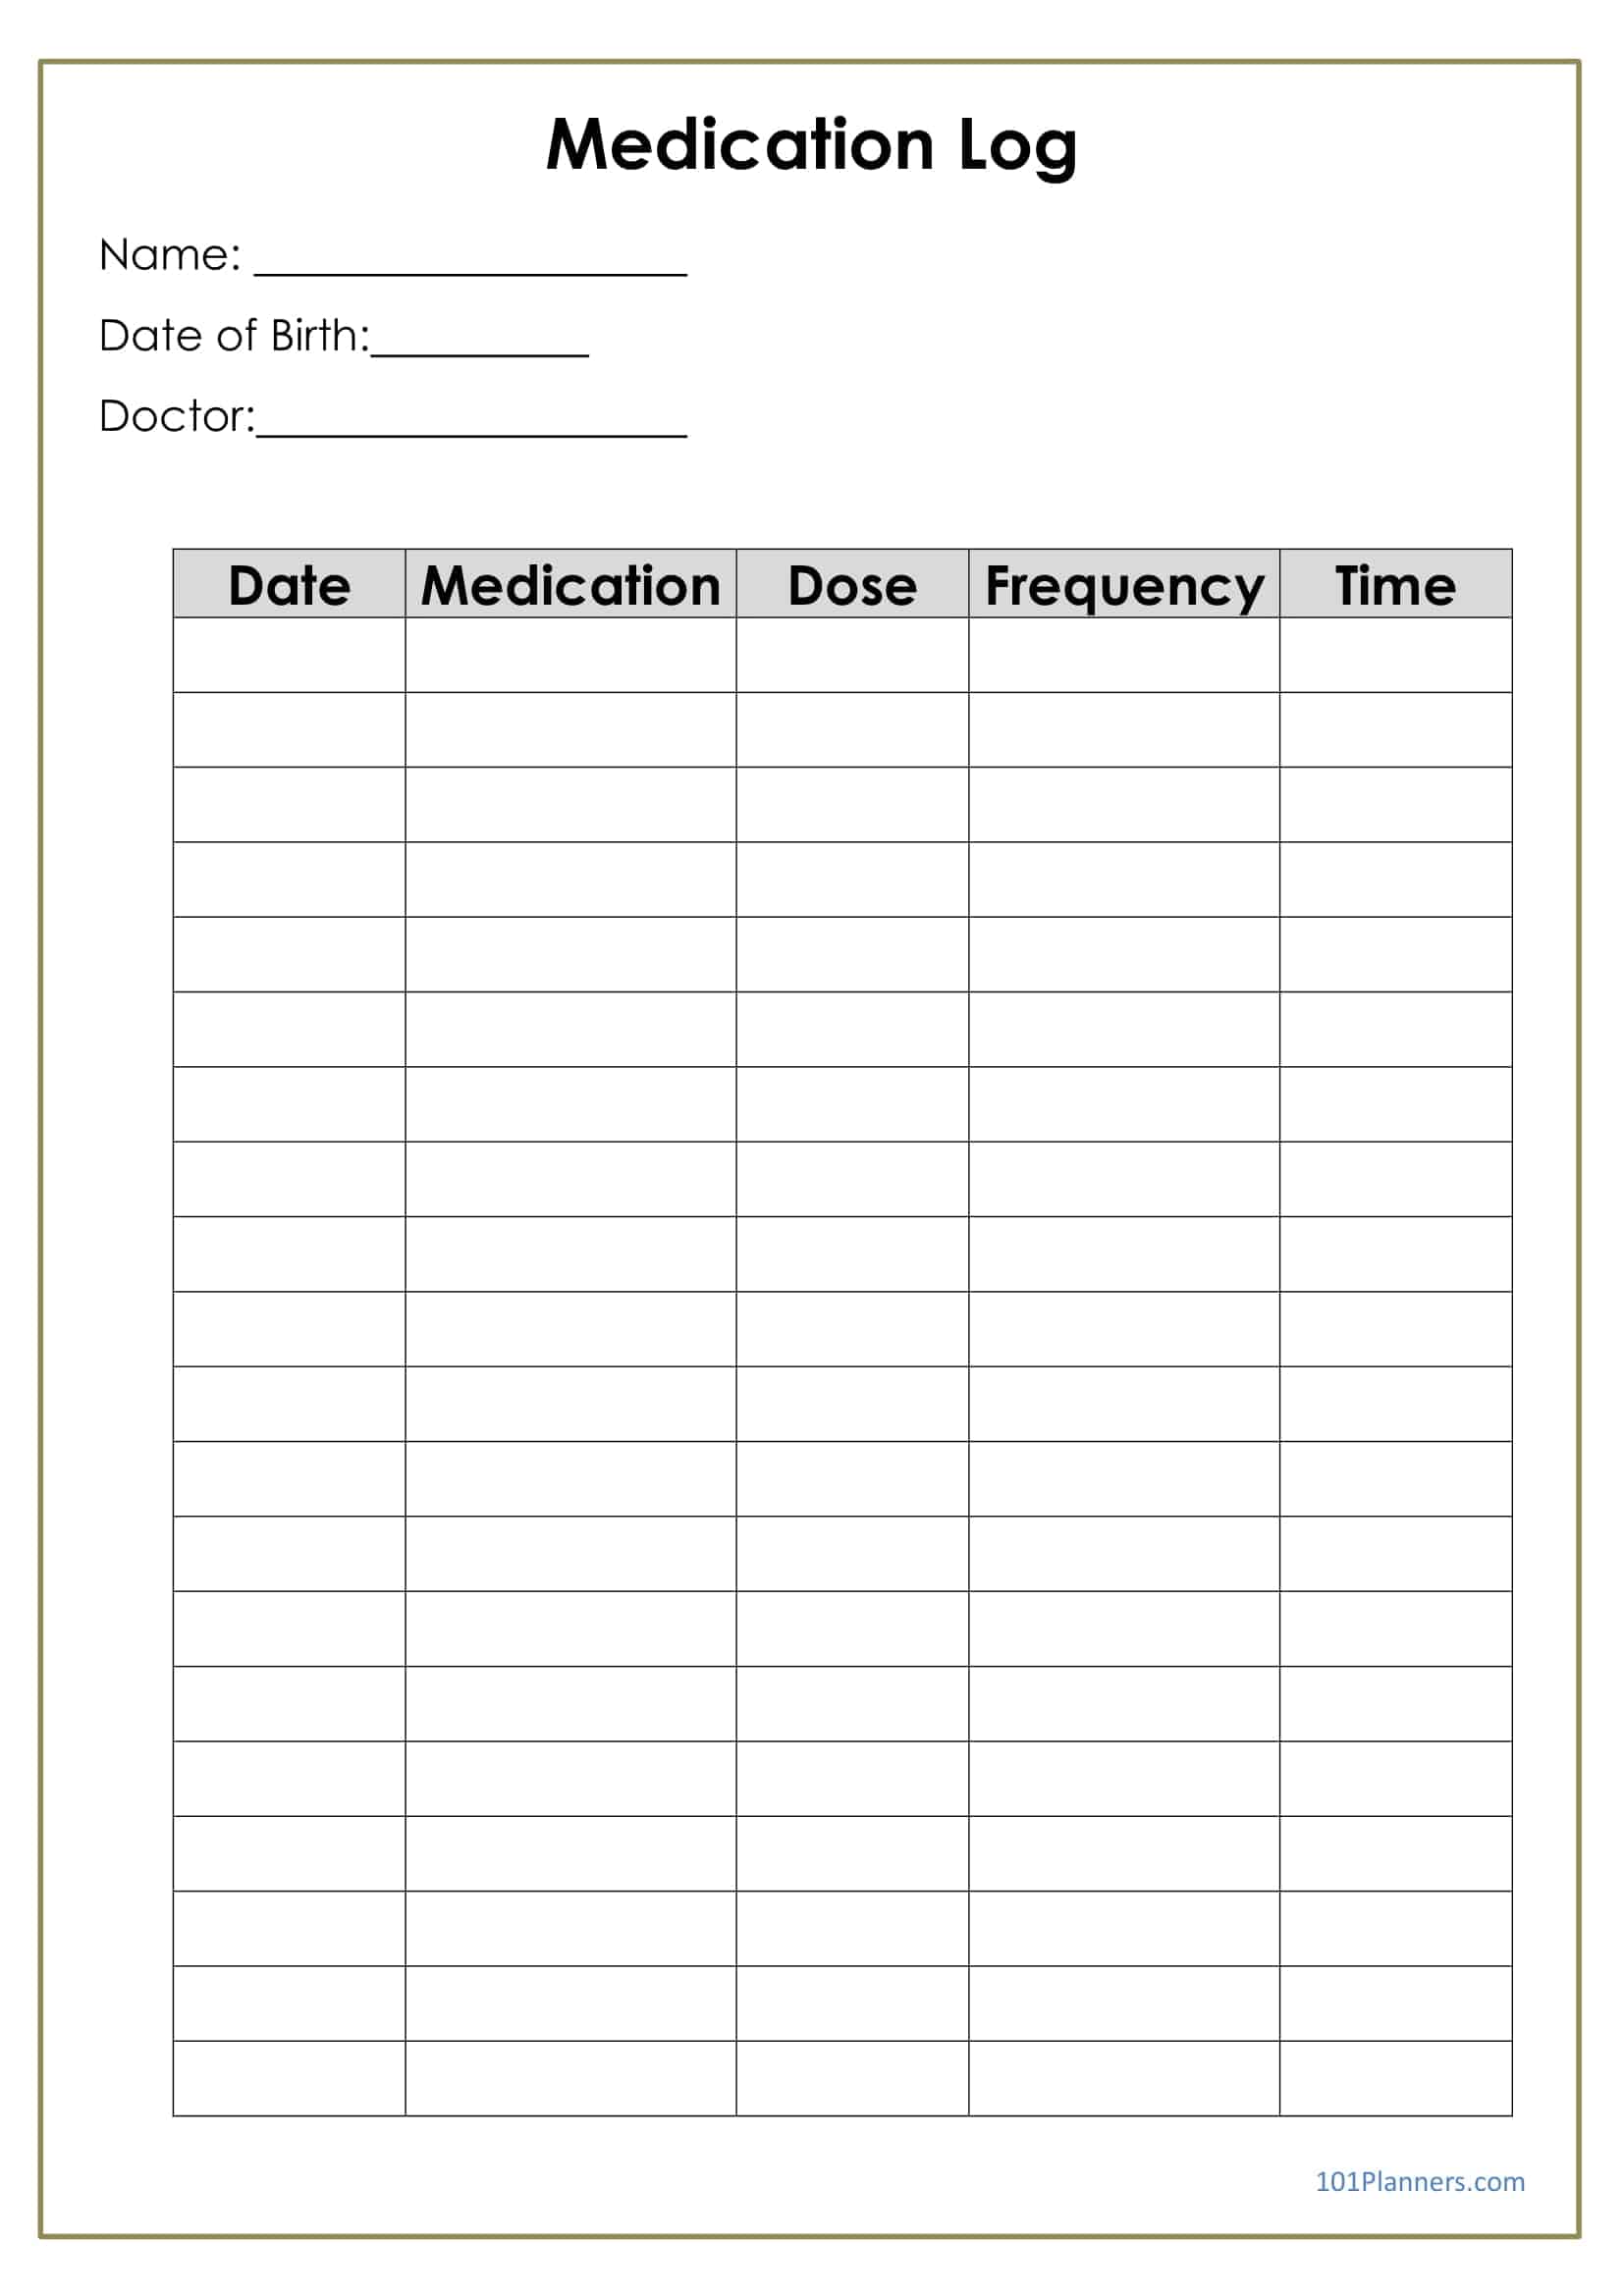 Medication Sheet Template from www.101planners.com